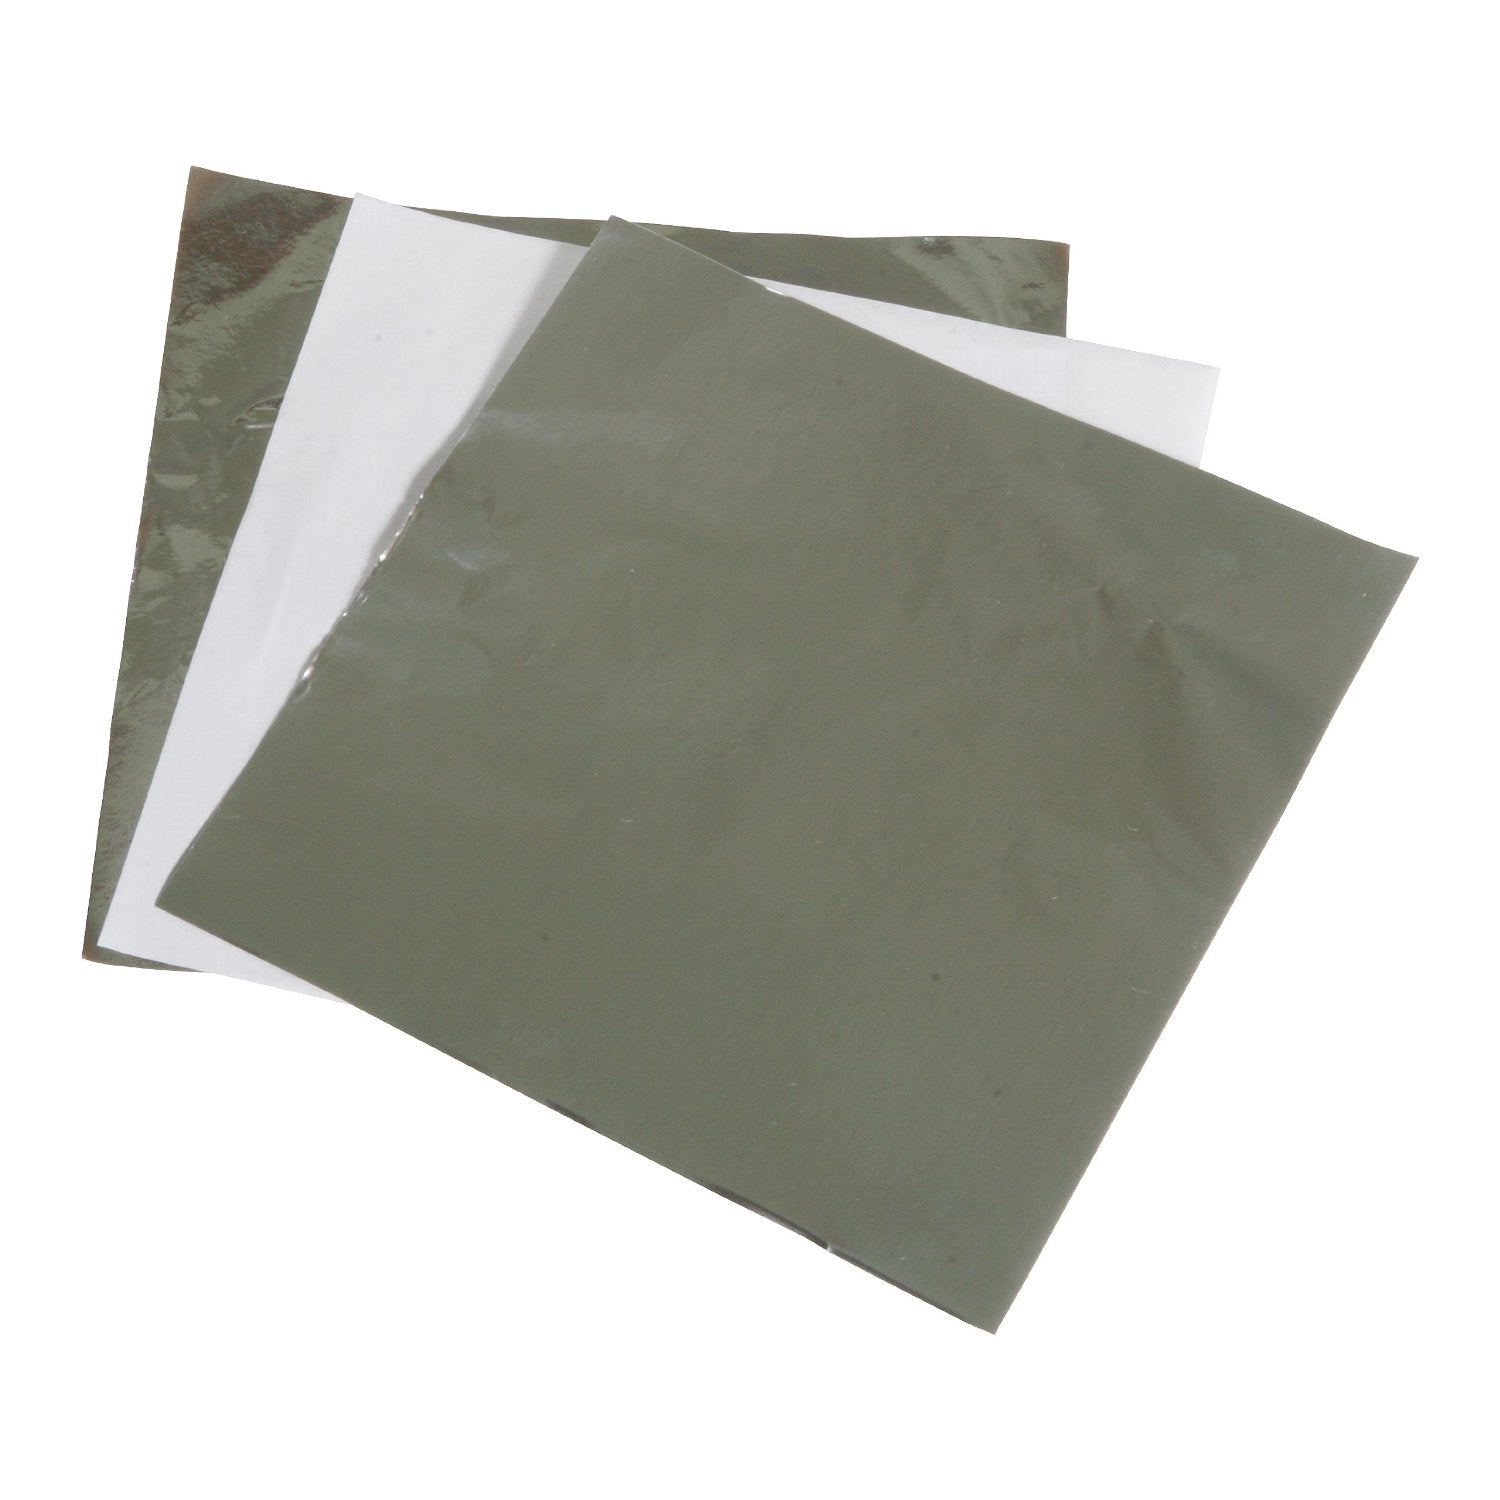 Dyn-A-Med ALUMINUM FOIL 4" X 4" SQUARE .001 INCH THICK SHEETS (PACK OF 500) PN:80041